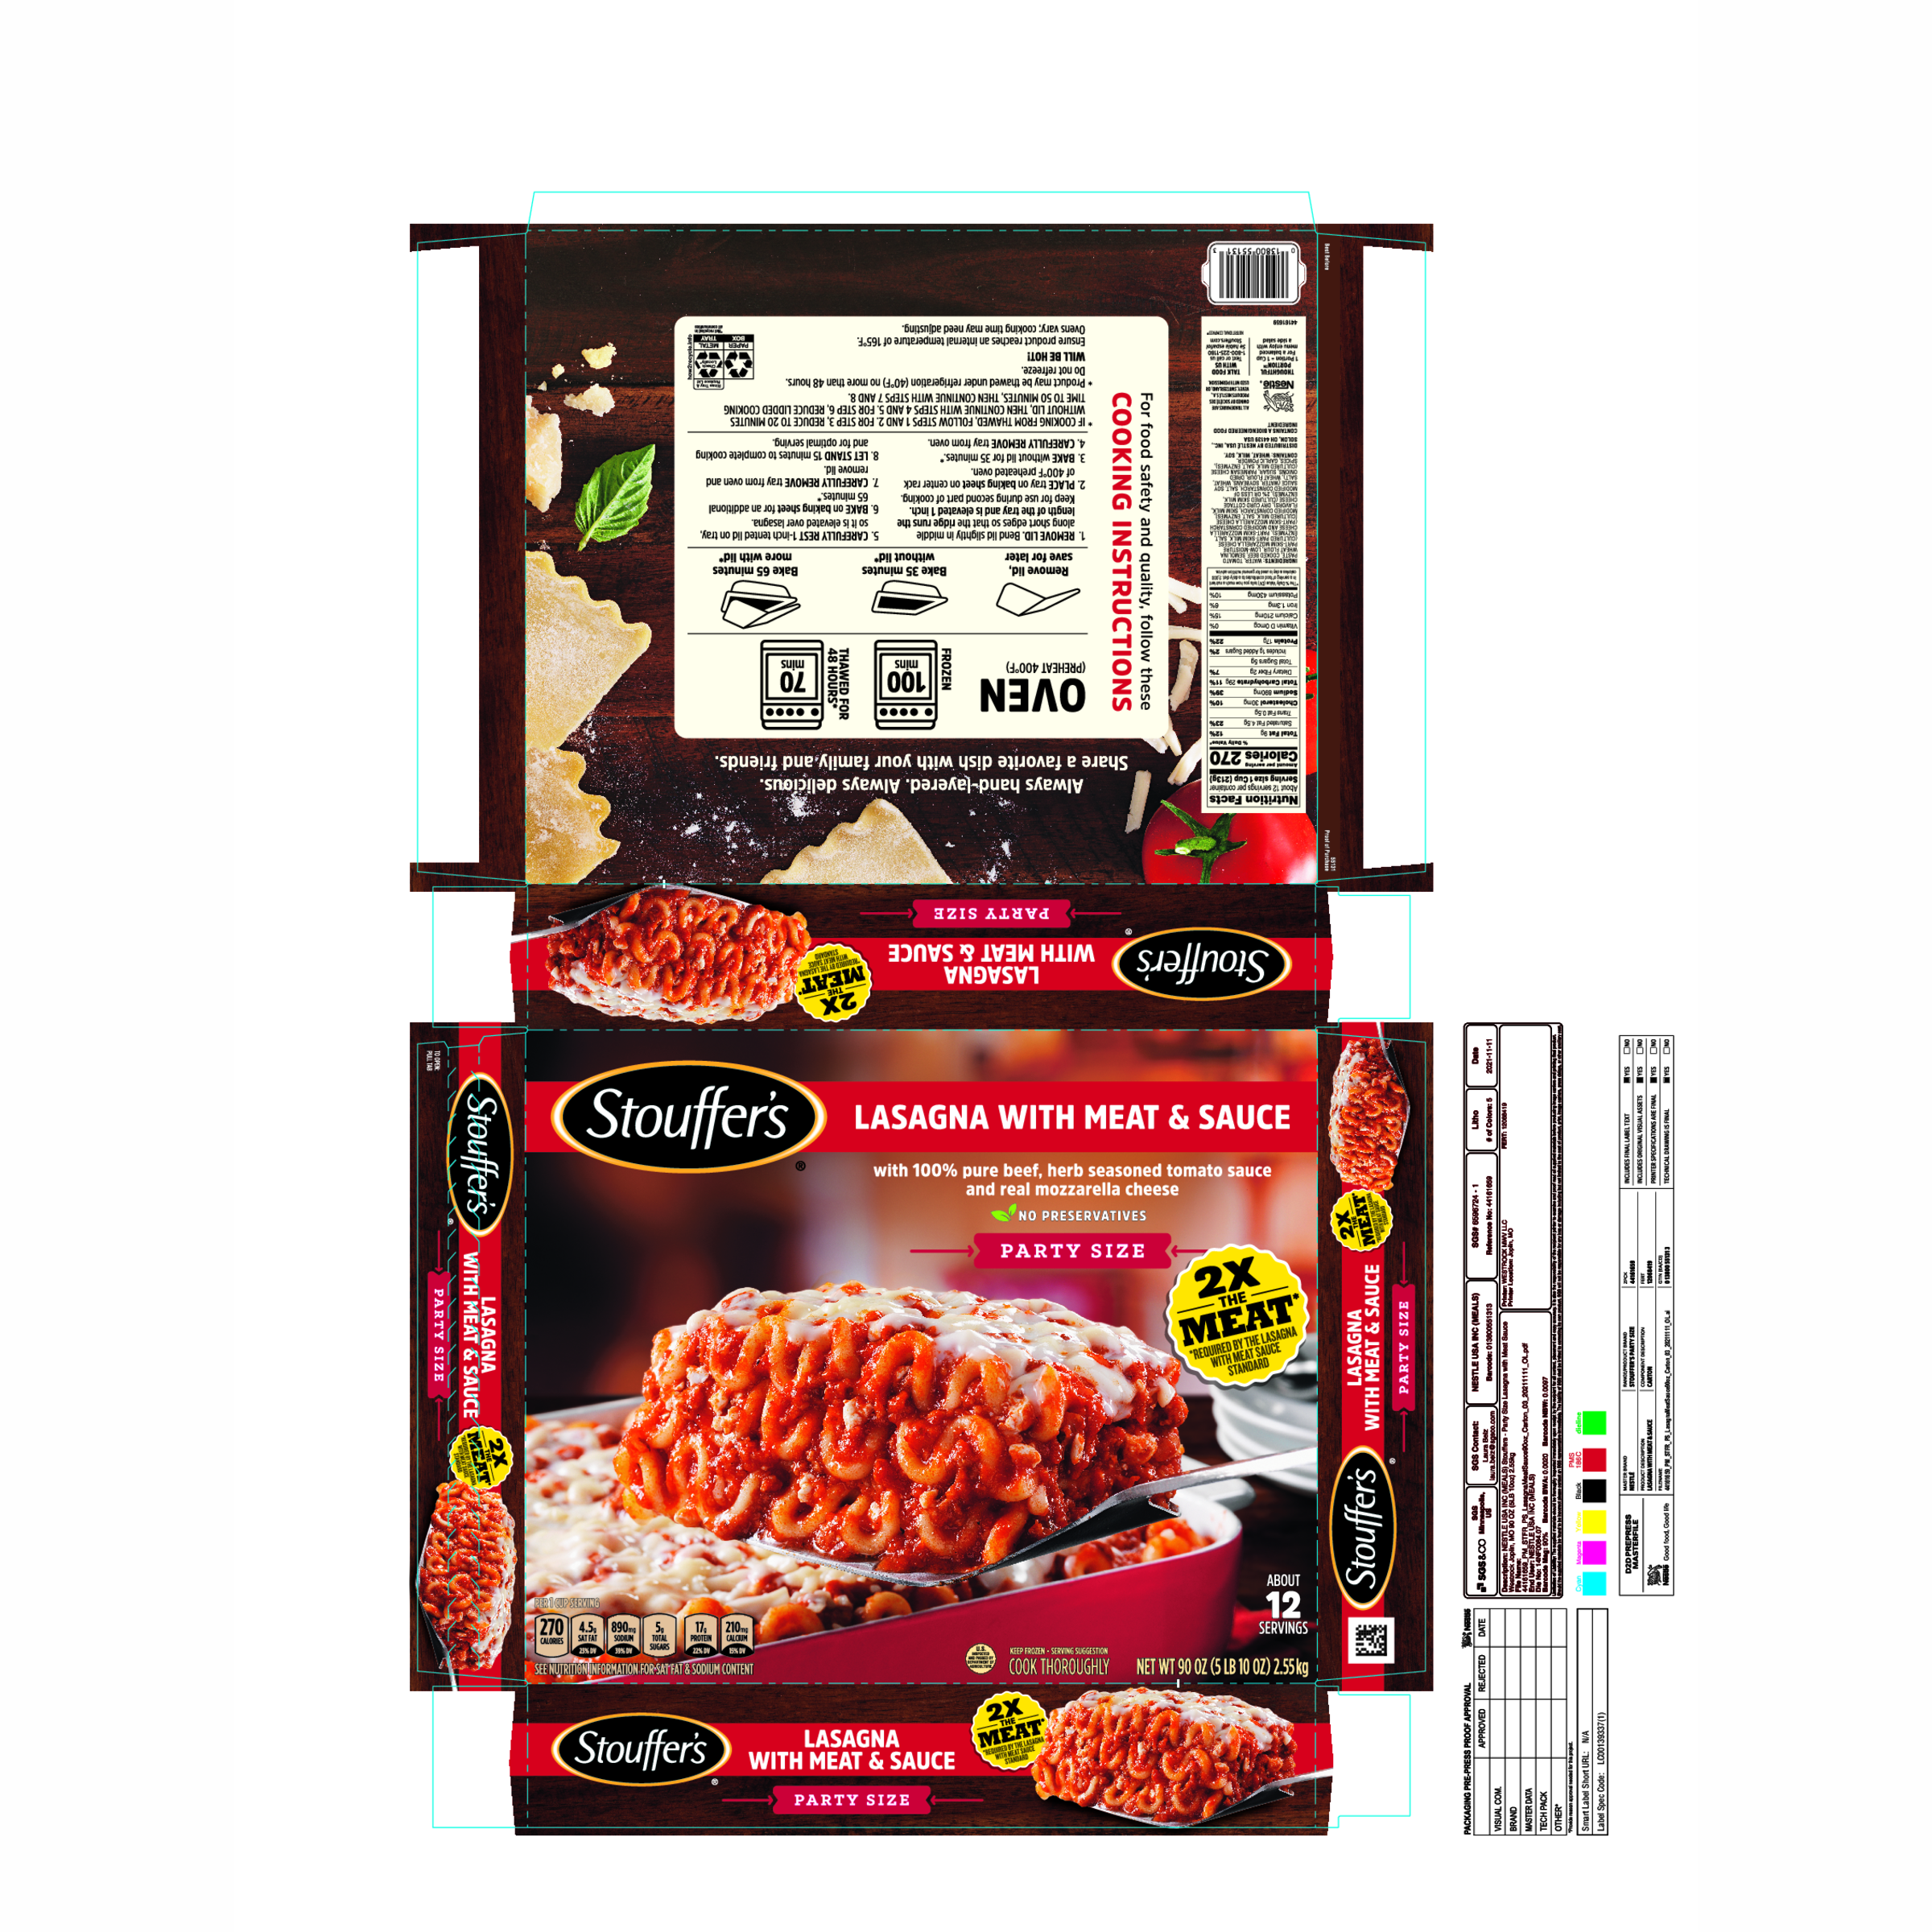 STOUFFER'S Lasagna with Meat & Sauce (Party Size) 6 units per case 90.0 oz Product Label